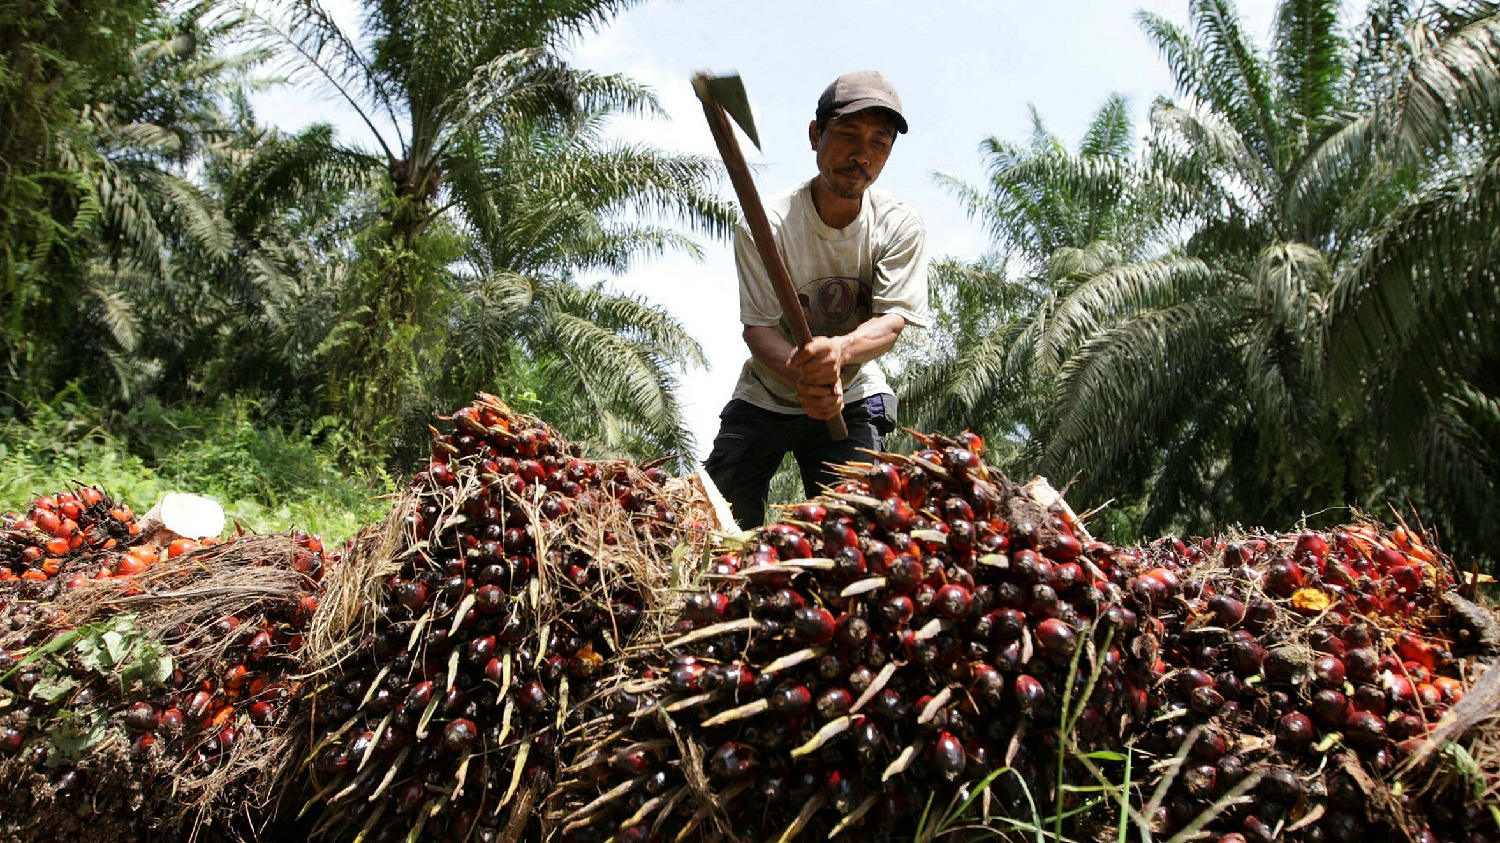 Royal Golden Eagle provides palm oil farmers with alternative income